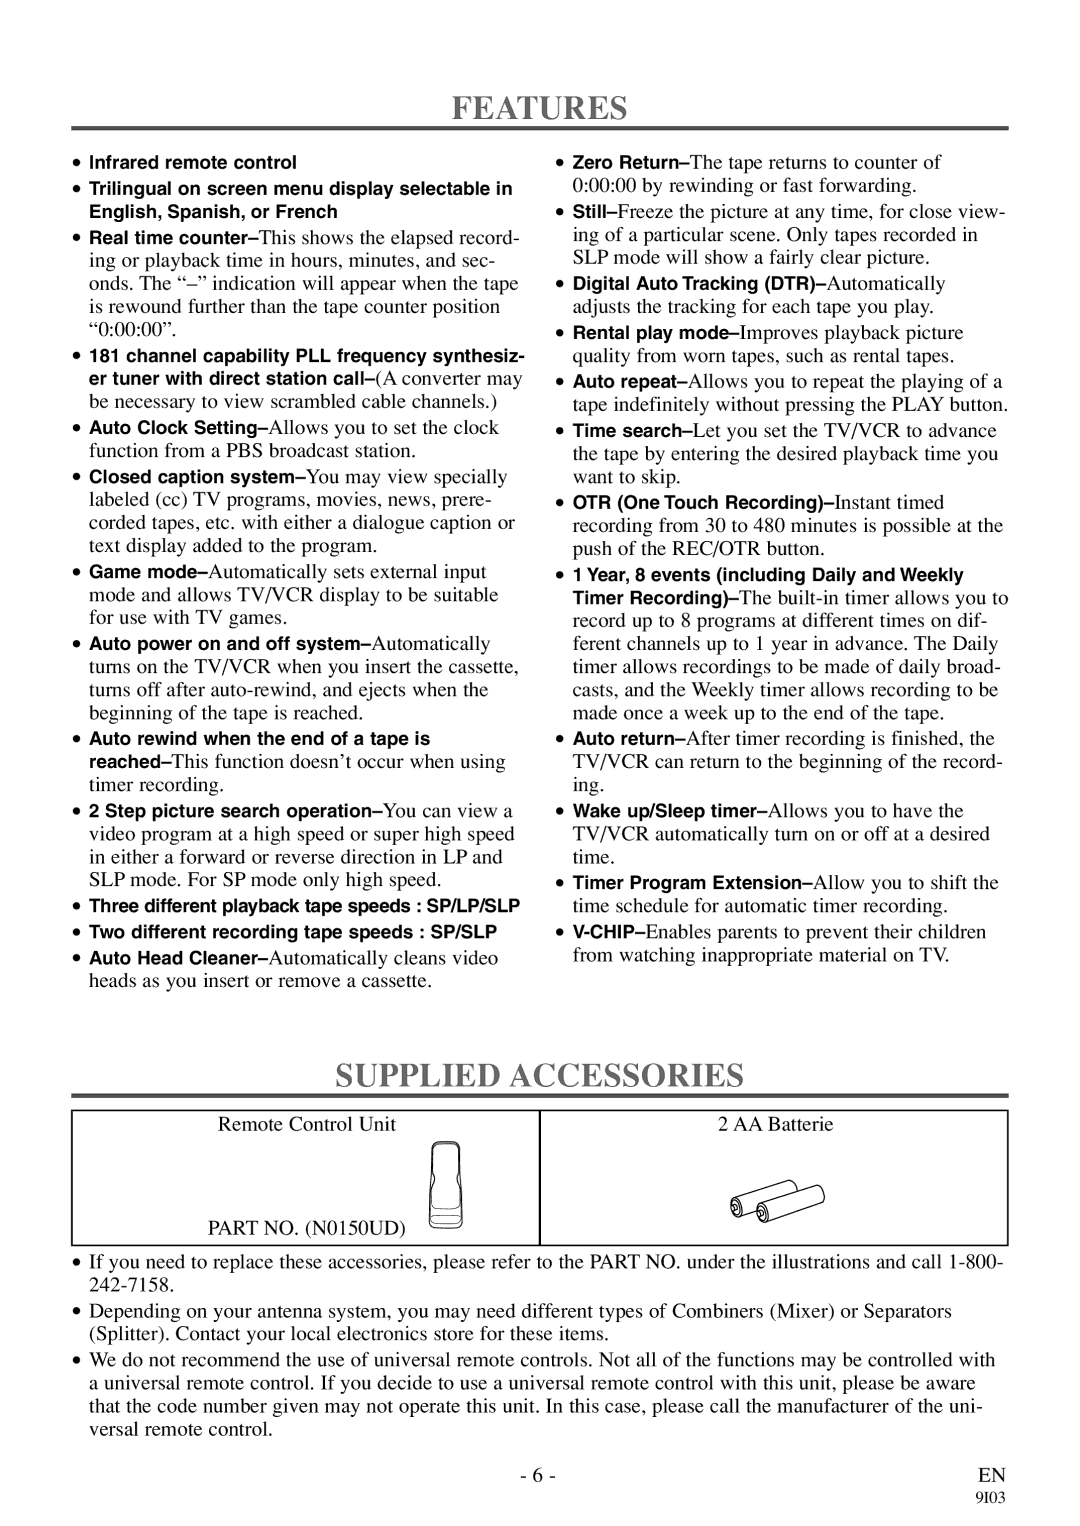 Symphonic WF319E owner manual Features, Supplied Accessories 